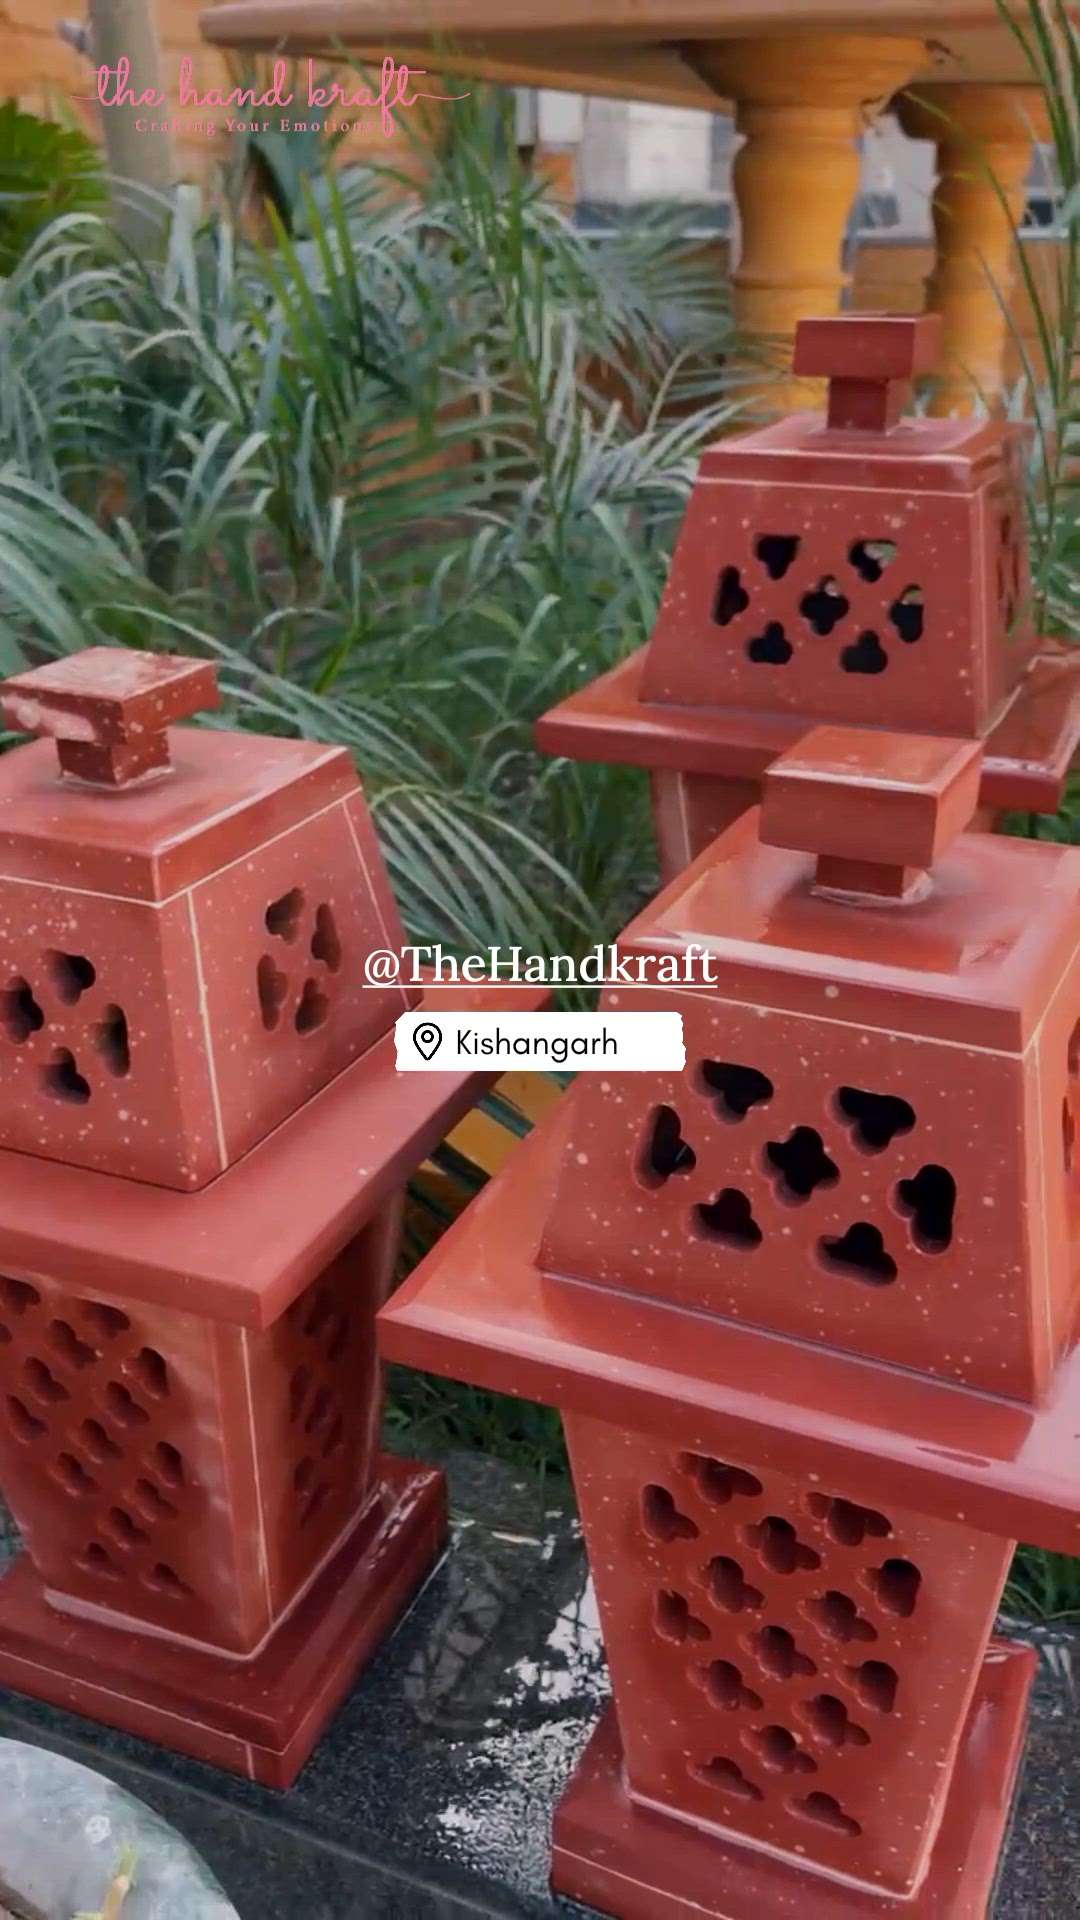 Dholpur Red Stone Light Lamp..

We at The HandKraft build each item with a story to tell.

Don’t miss out on this opportunity to enhance your place with us.

Contact us at - 📞 +91 63780-91556.

@thehandkraft.official
@thehandkraftofficial2024

Visit thehandkraft.com today to browse our collection or go through our catalogue.

#lamp #lightlamp #marblelamp #dholpur_rajasthan
#dholpurstone #handcrafted #handmade

#homedecor. 
#interiordesign

#trendingreels
#rendingsongs
#traveltheworld
#trendylook

#explorepage #trendingsongs #trendylook #art #artwork #viralvideos  #trendingwork 

365INSTAVIRAL100KVIEWS